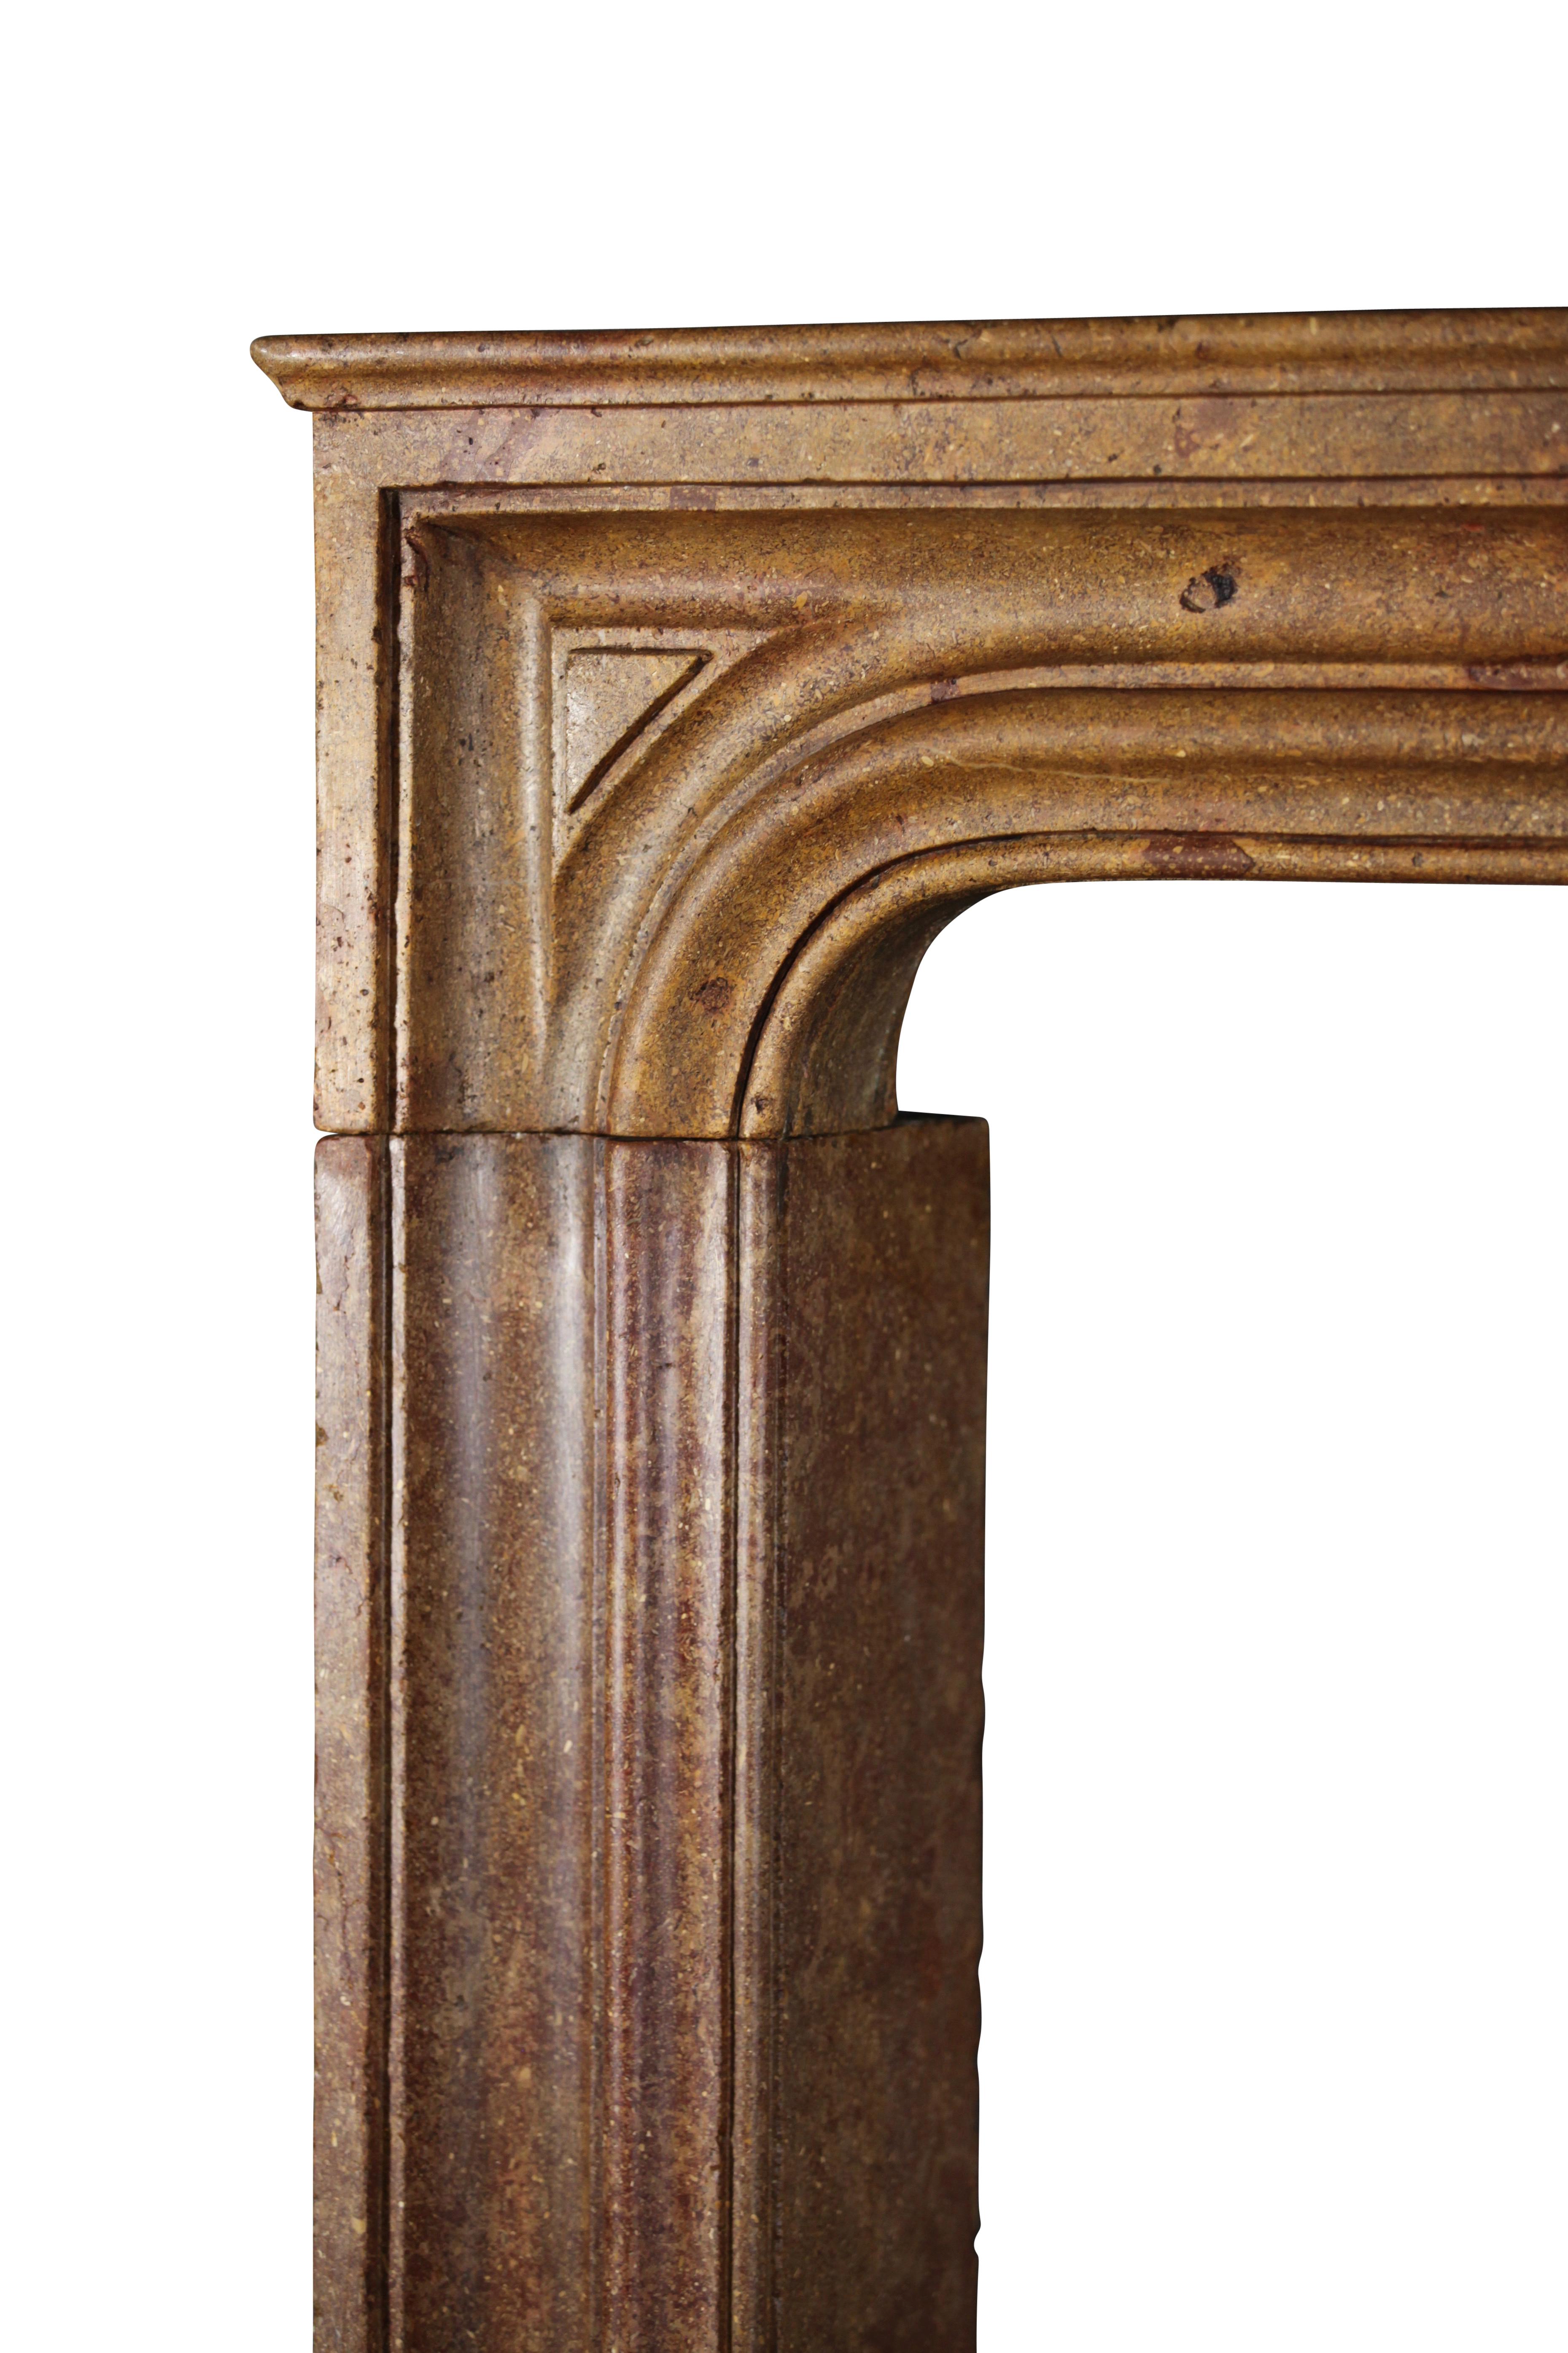 Polished Fine European And Small Straight Italian Antique Fireplace Surround in Marble For Sale